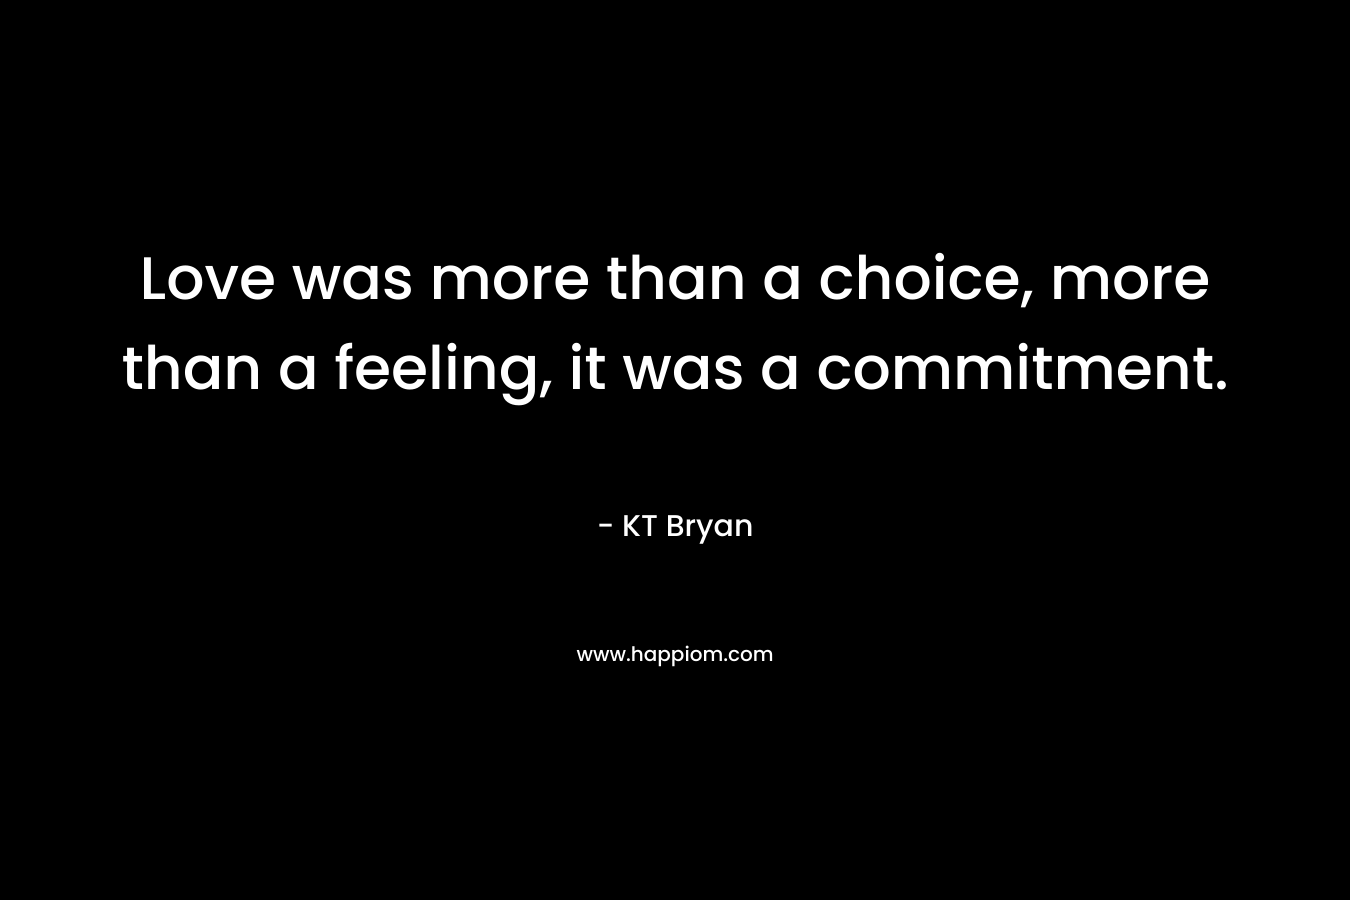 Love was more than a choice, more than a feeling, it was a commitment. – KT Bryan